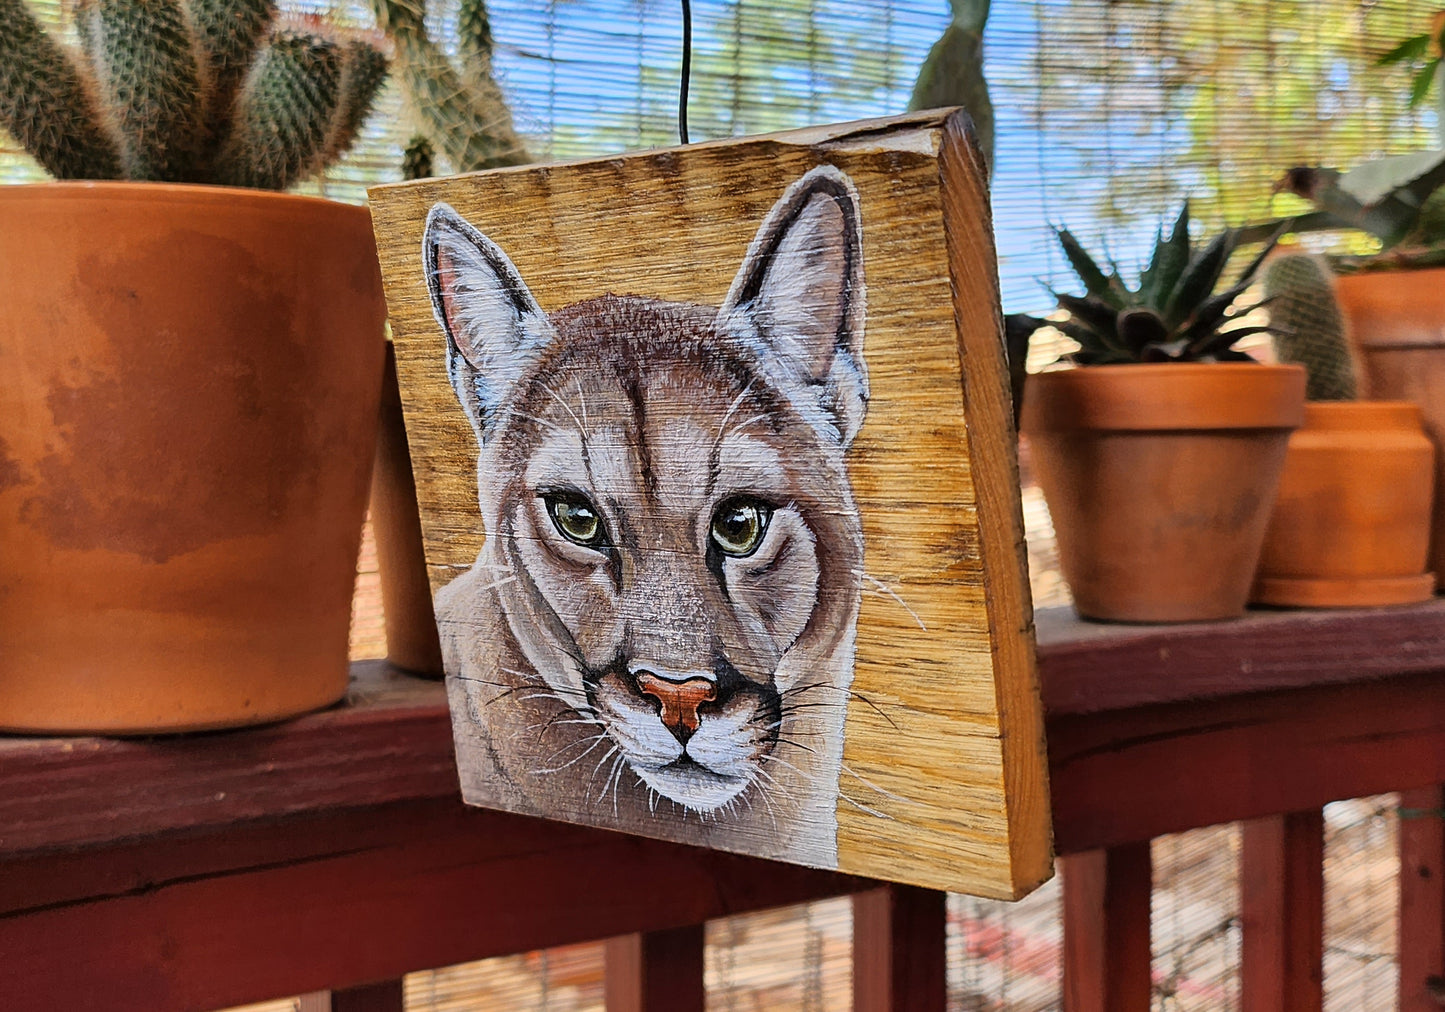 Cougar Acrylic Painting on Reclaimed Wood, Sonoran Desert, Southwestern Art, Catamount, Panther, Puma, Mountain Lion